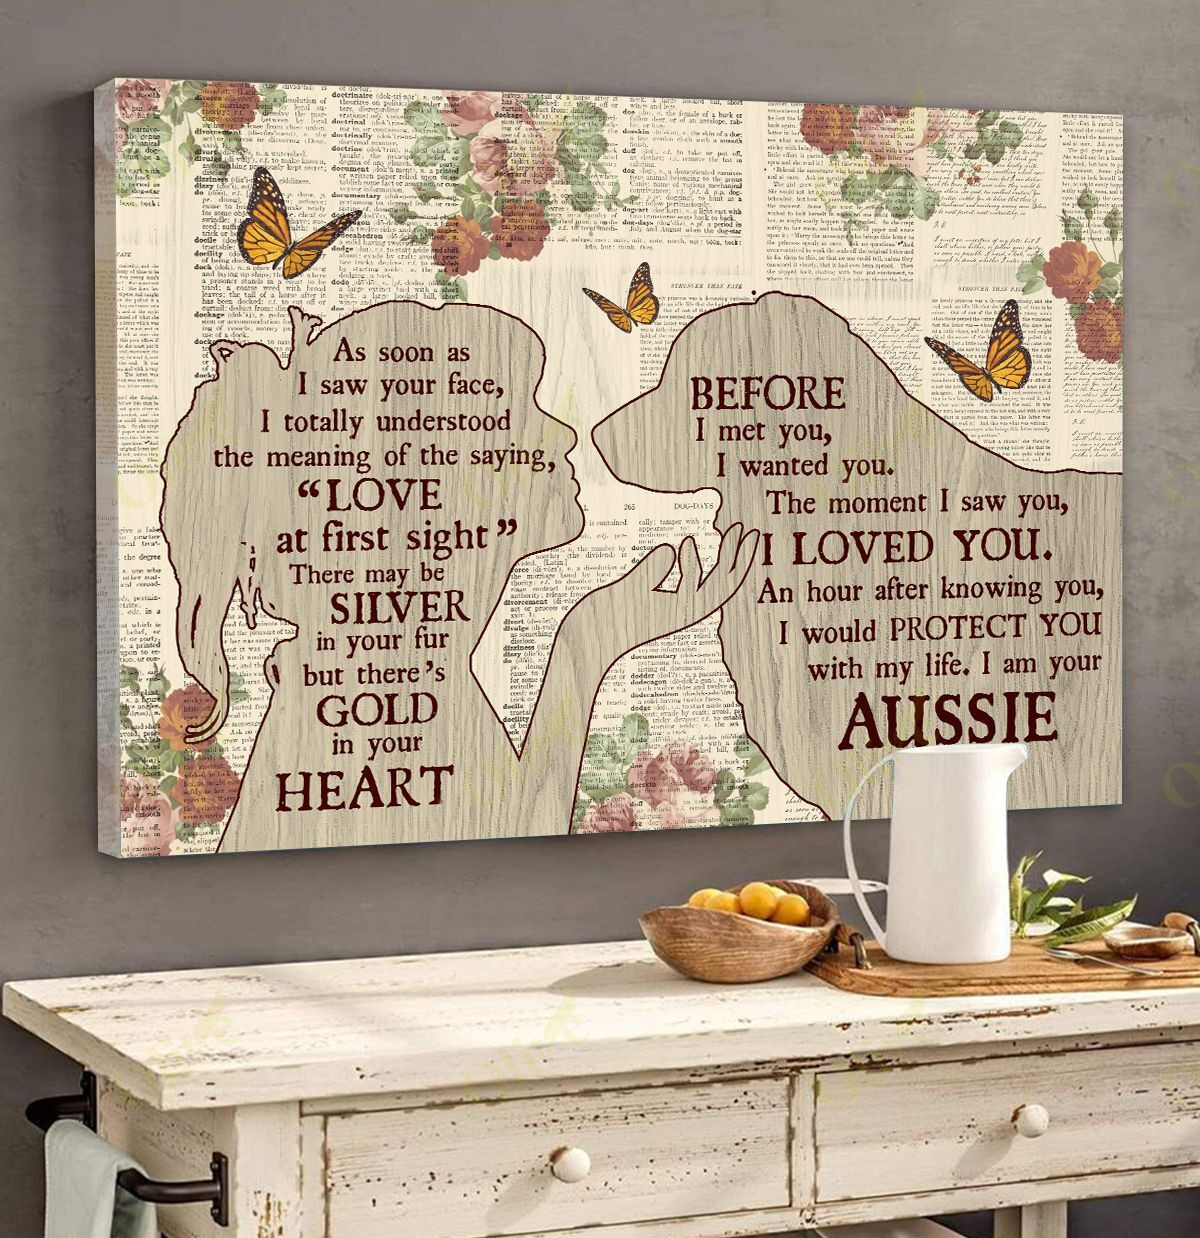 Aussie - Love At The First Sight Poster And Canvas Art Wall Decor